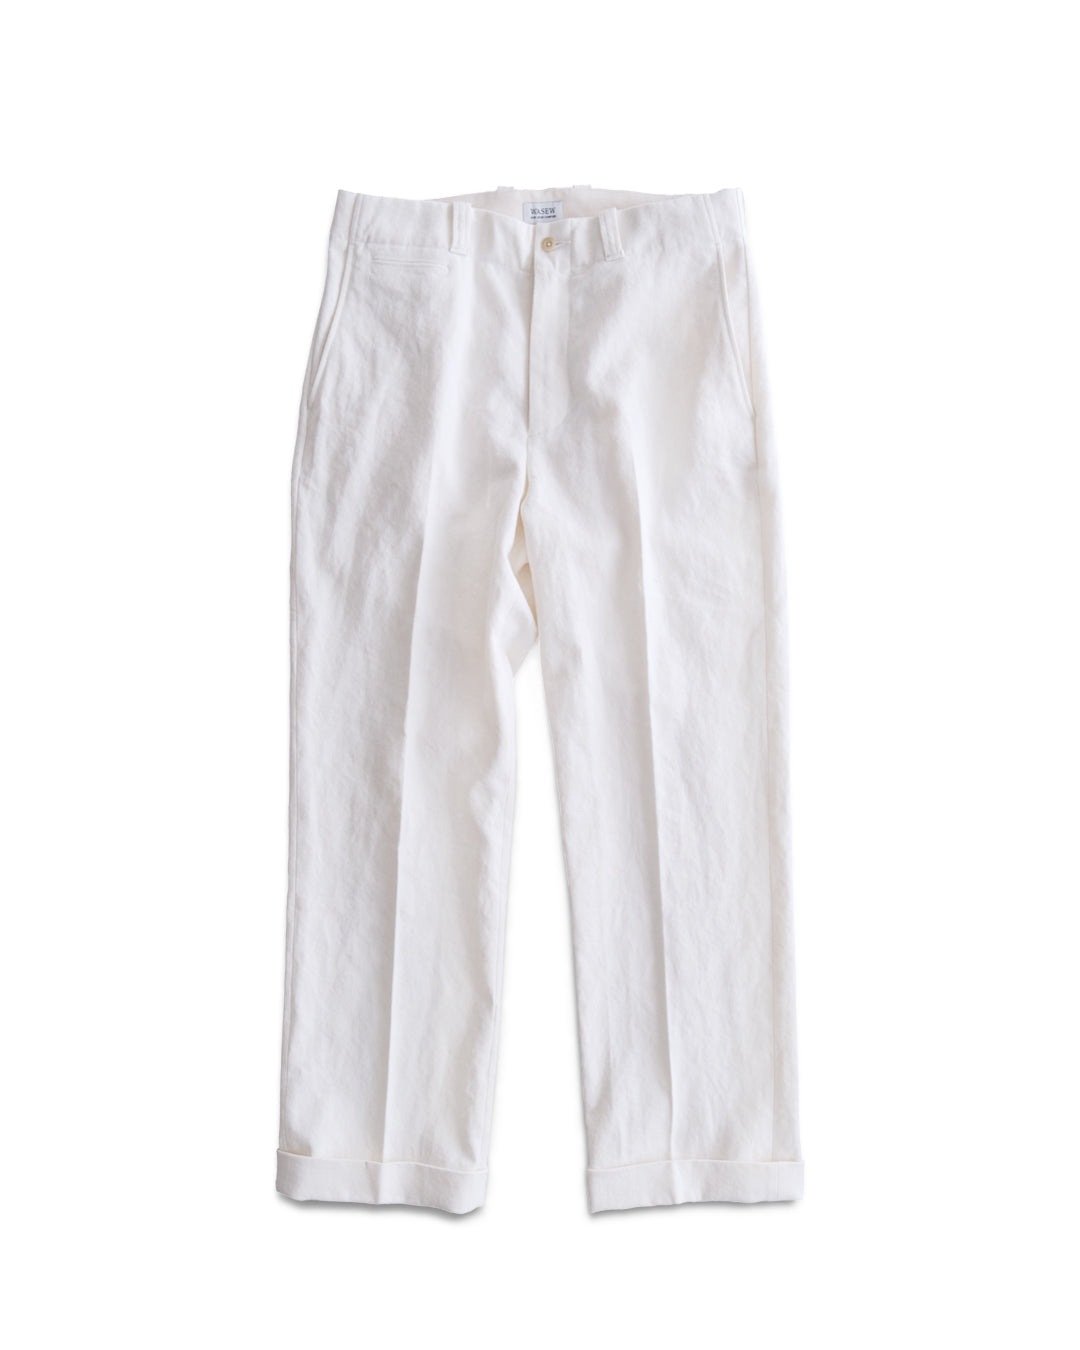 WC TROUSERS (WHITE)